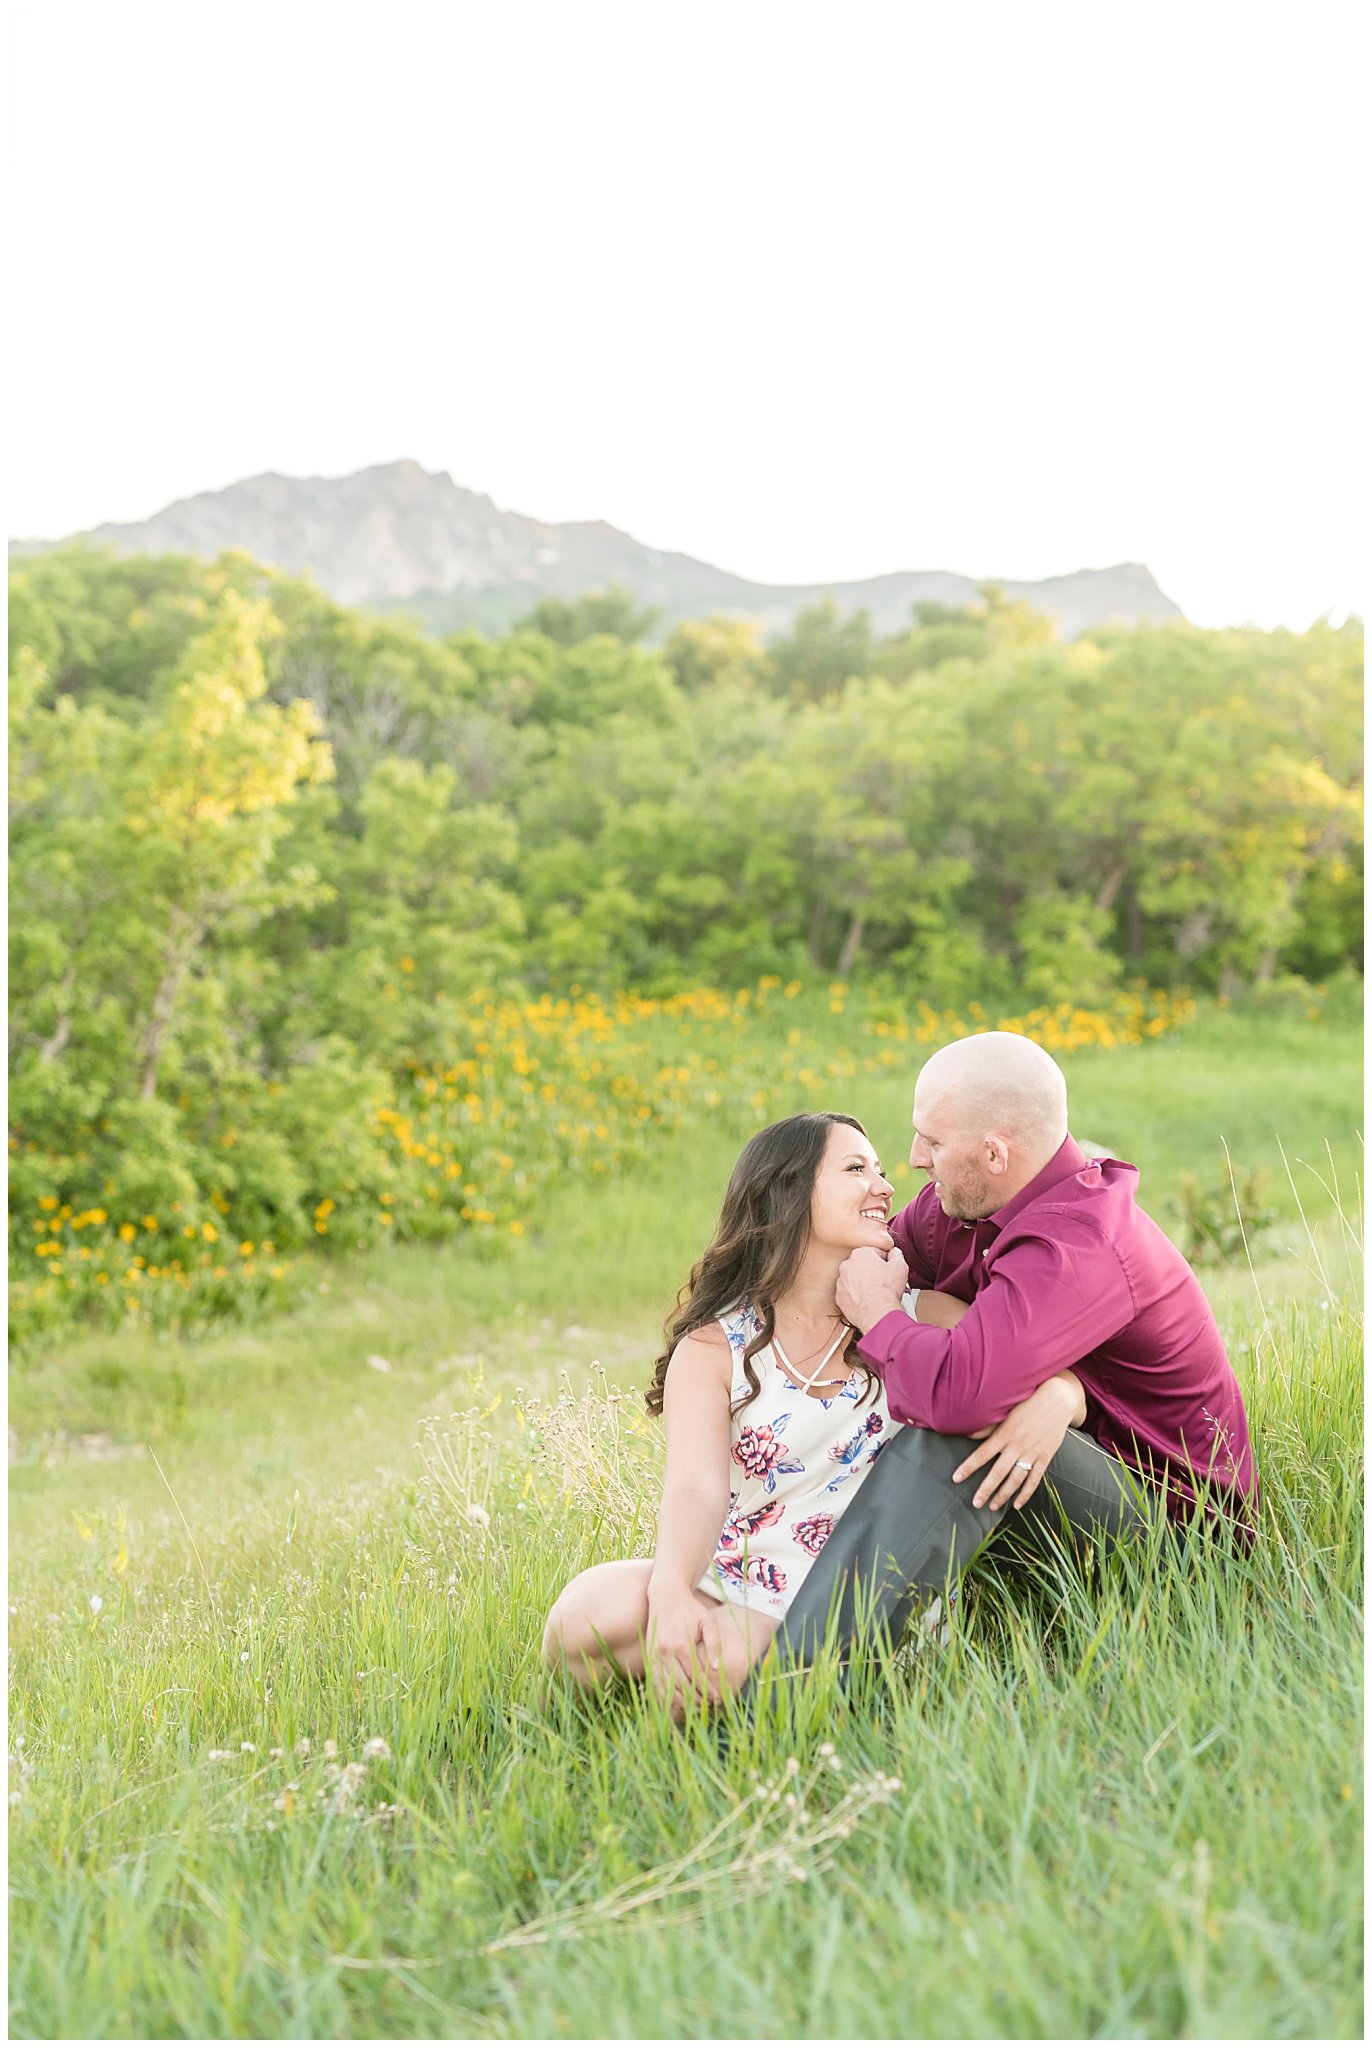 Couple's engagement session with mountains in the background and wildflowers | Snowbasin Utah Engagements